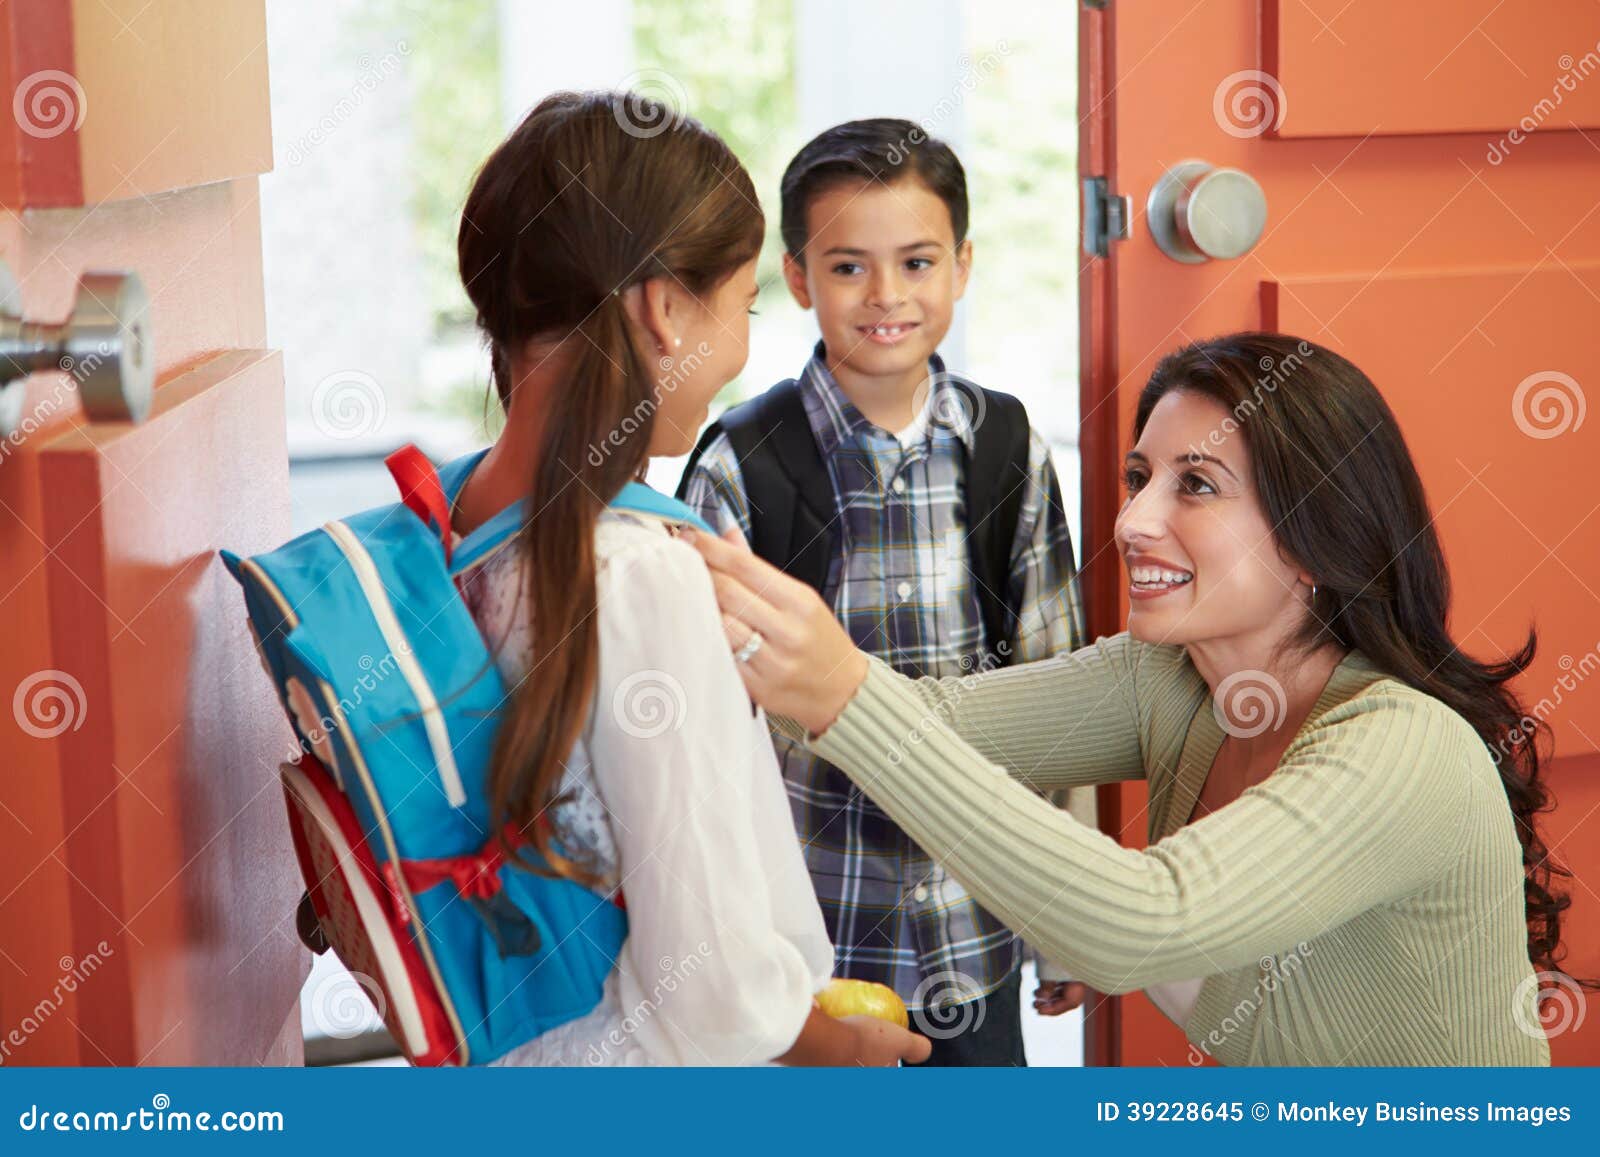 mother saying goodbye to children as they leave for school